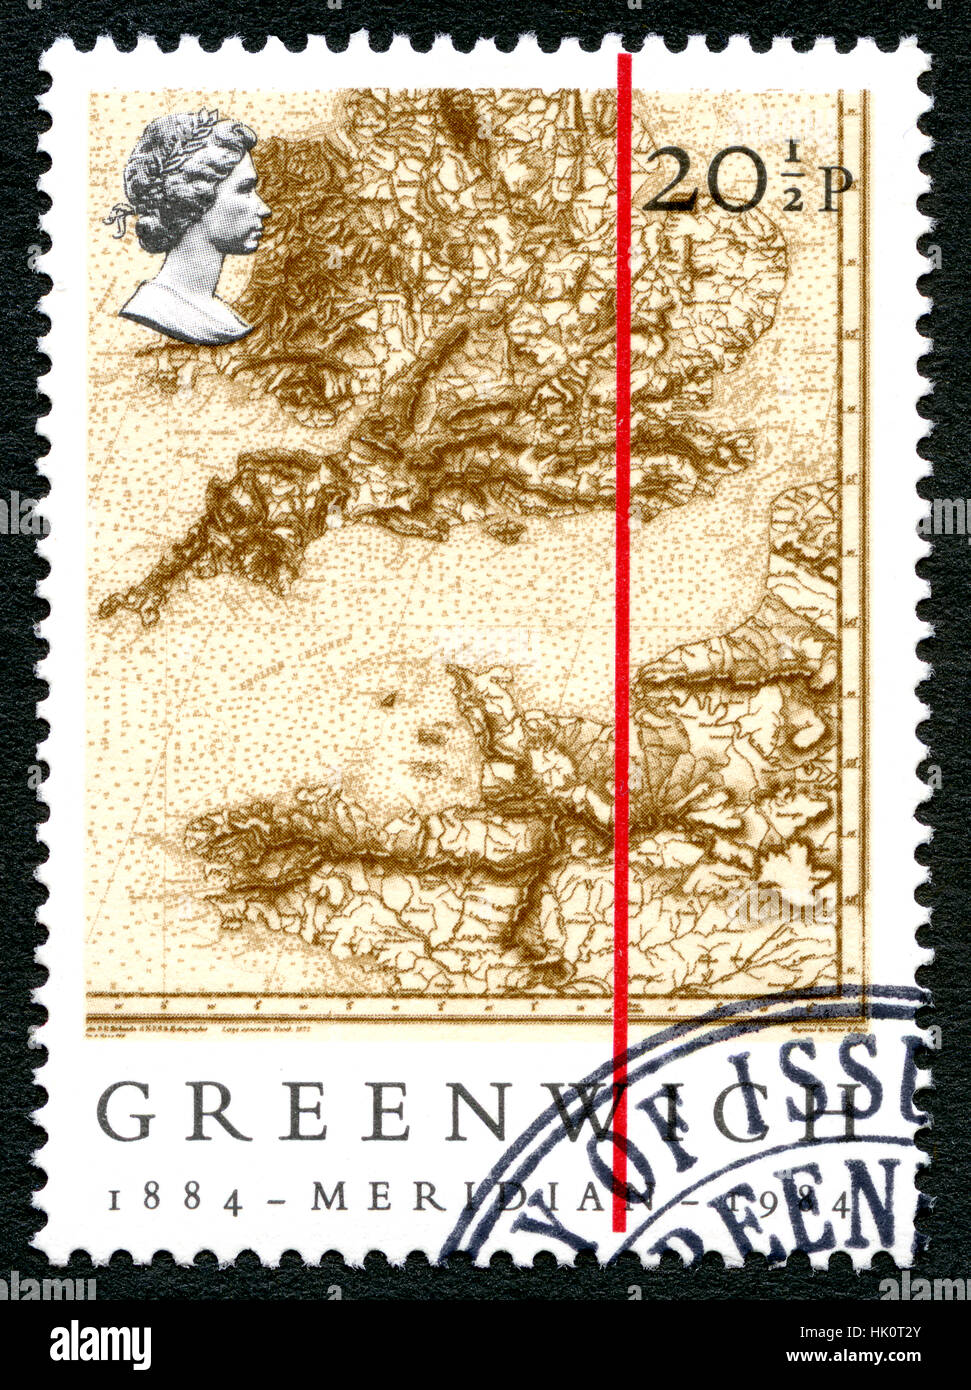 GREAT BRITAIN - CIRCA 1984: A used postage stamp from the UK, commemorating the Greenwich Meridian, circa 1984. Stock Photo